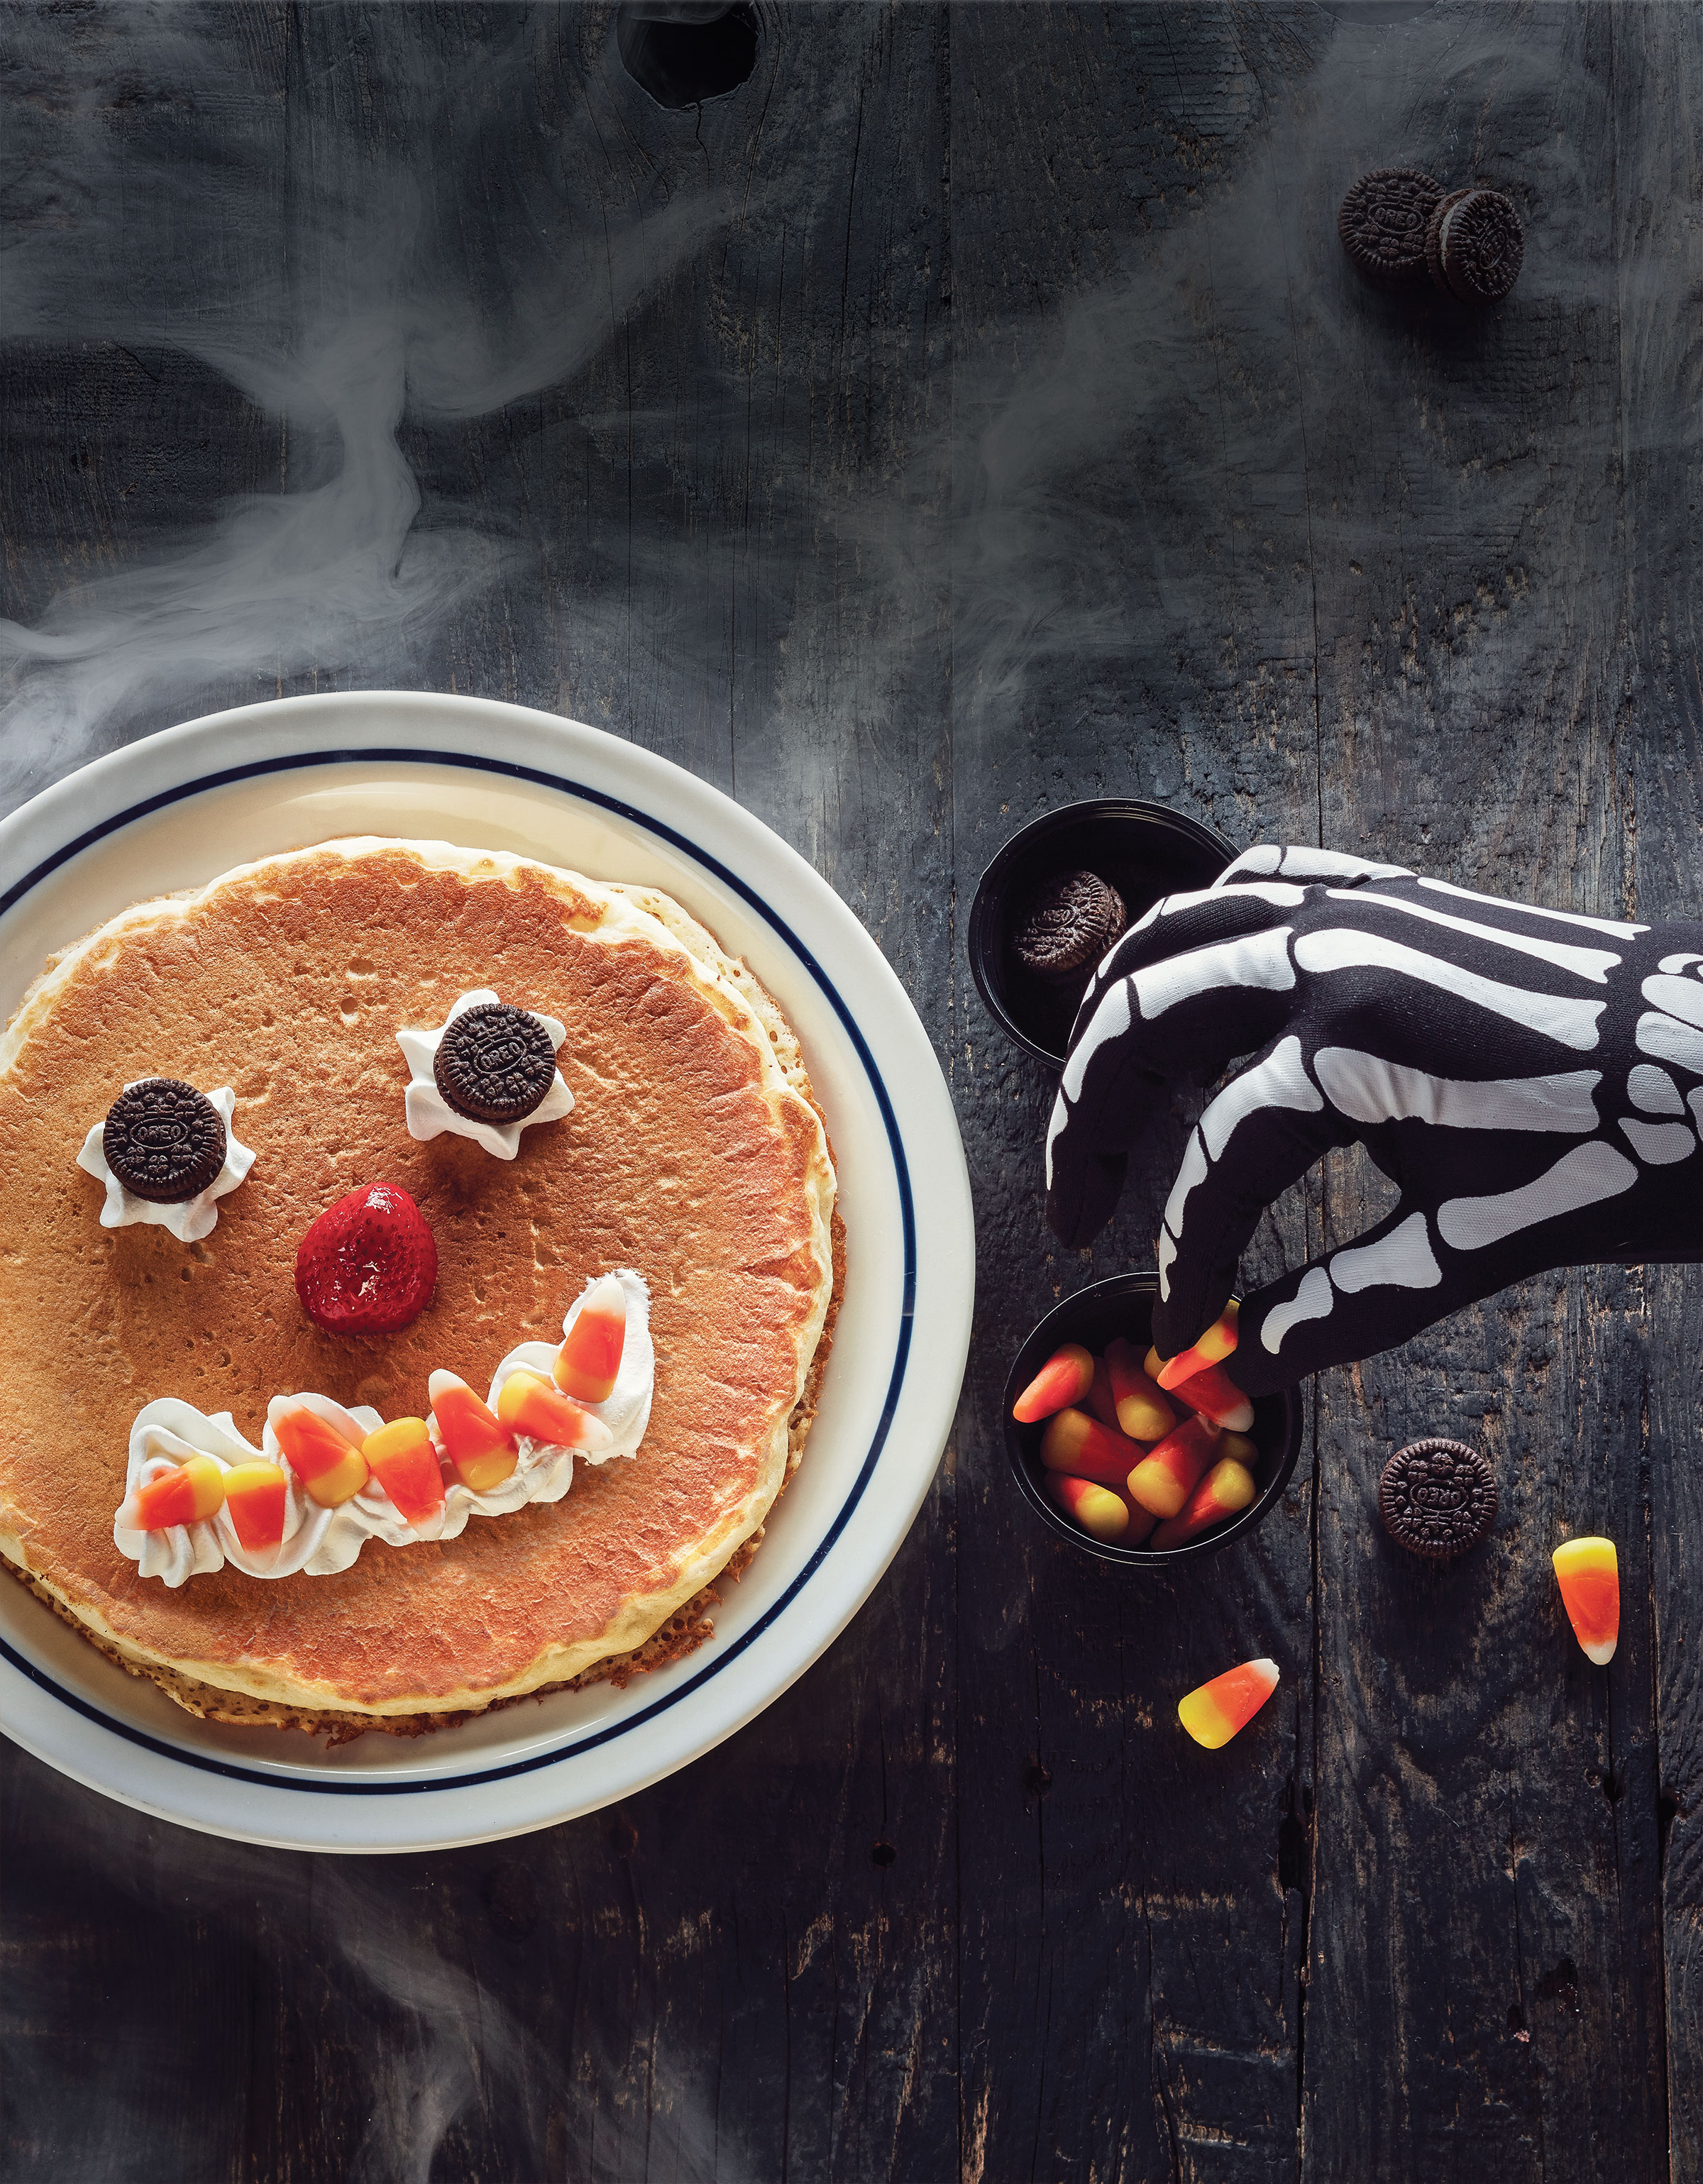 IHOP scary face pancake deal